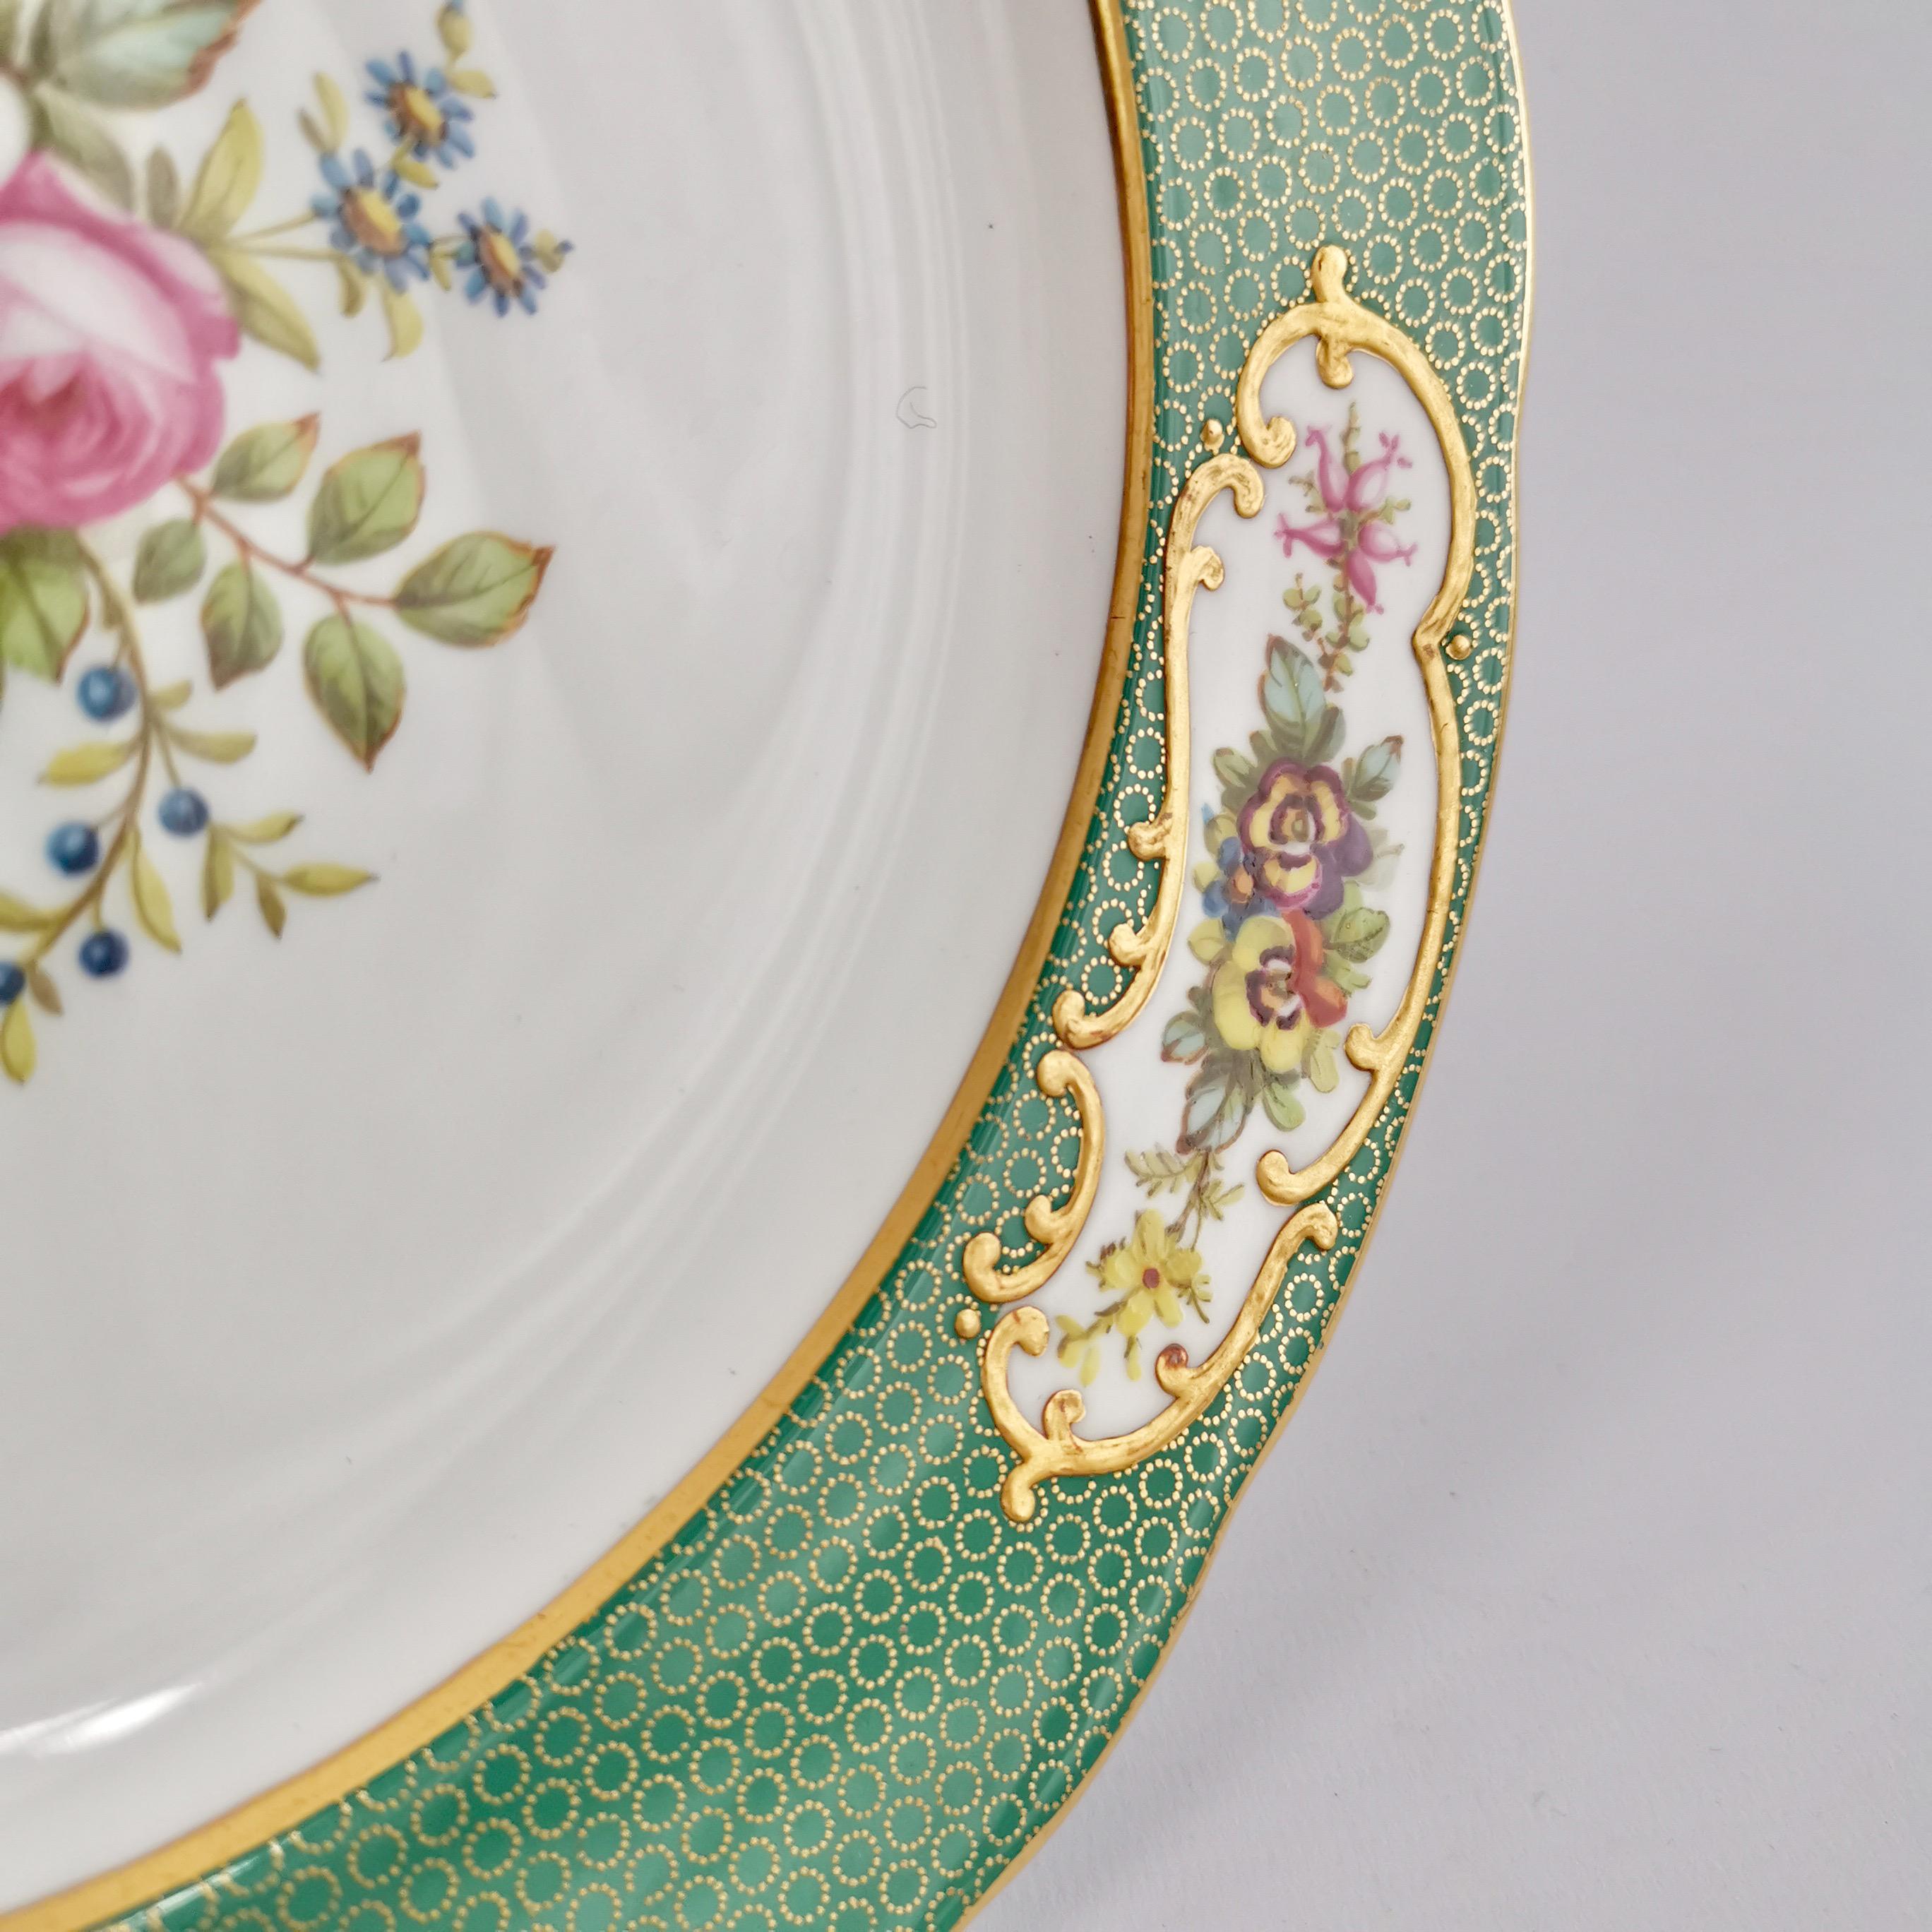 Hand-Painted Copeland Spode Porcelain Plate, Green Sèvres Style, Flowers, Thomas Goode, 1924